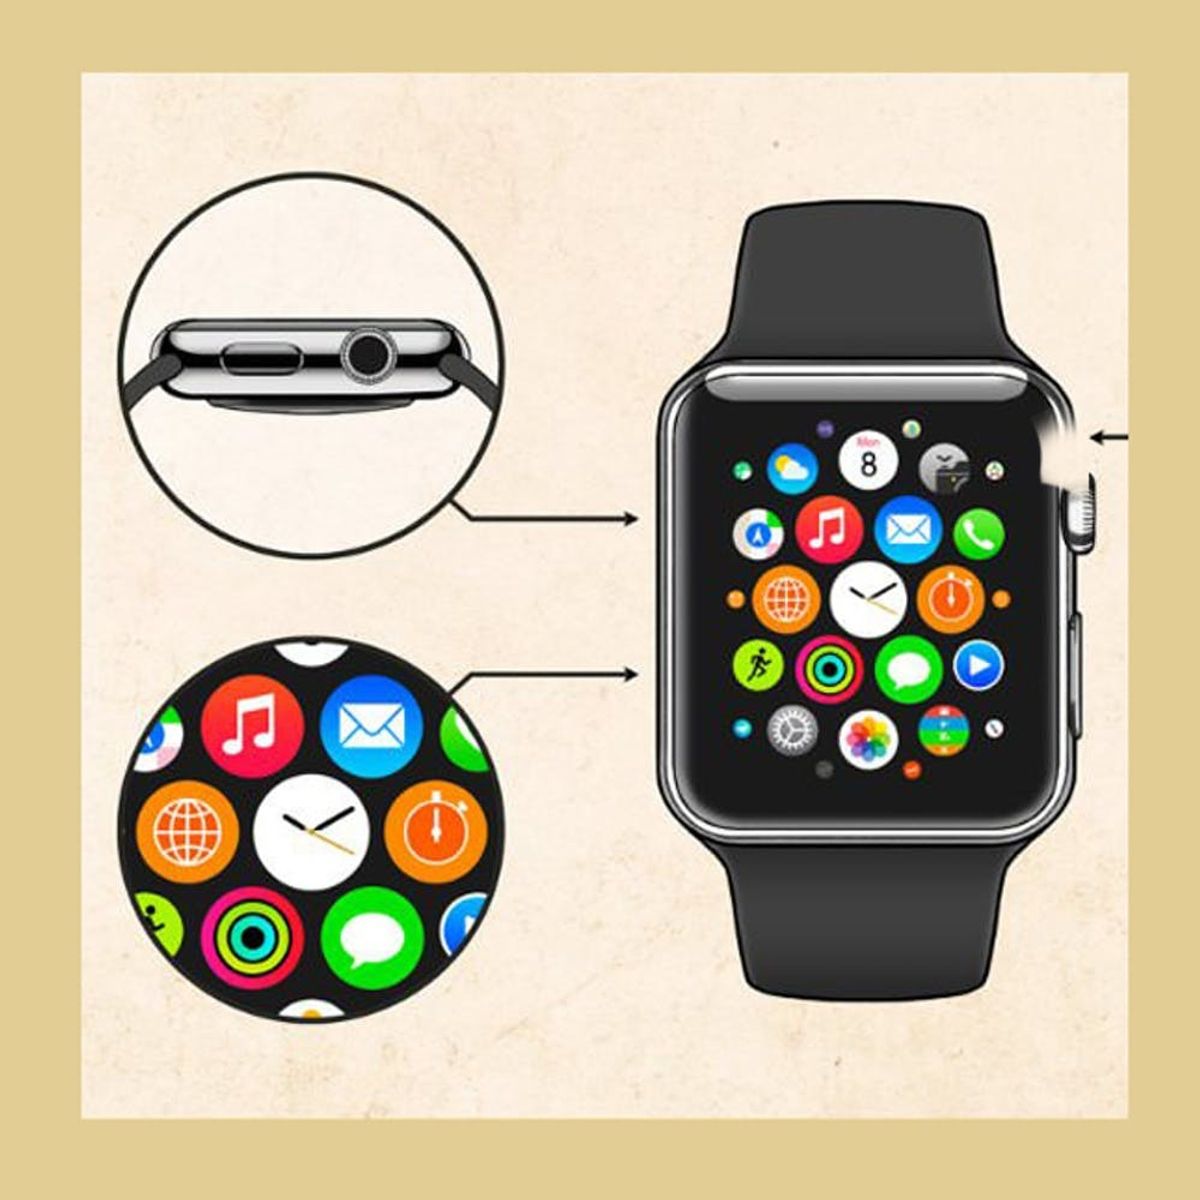 Before the Apple Watch: A Brief History